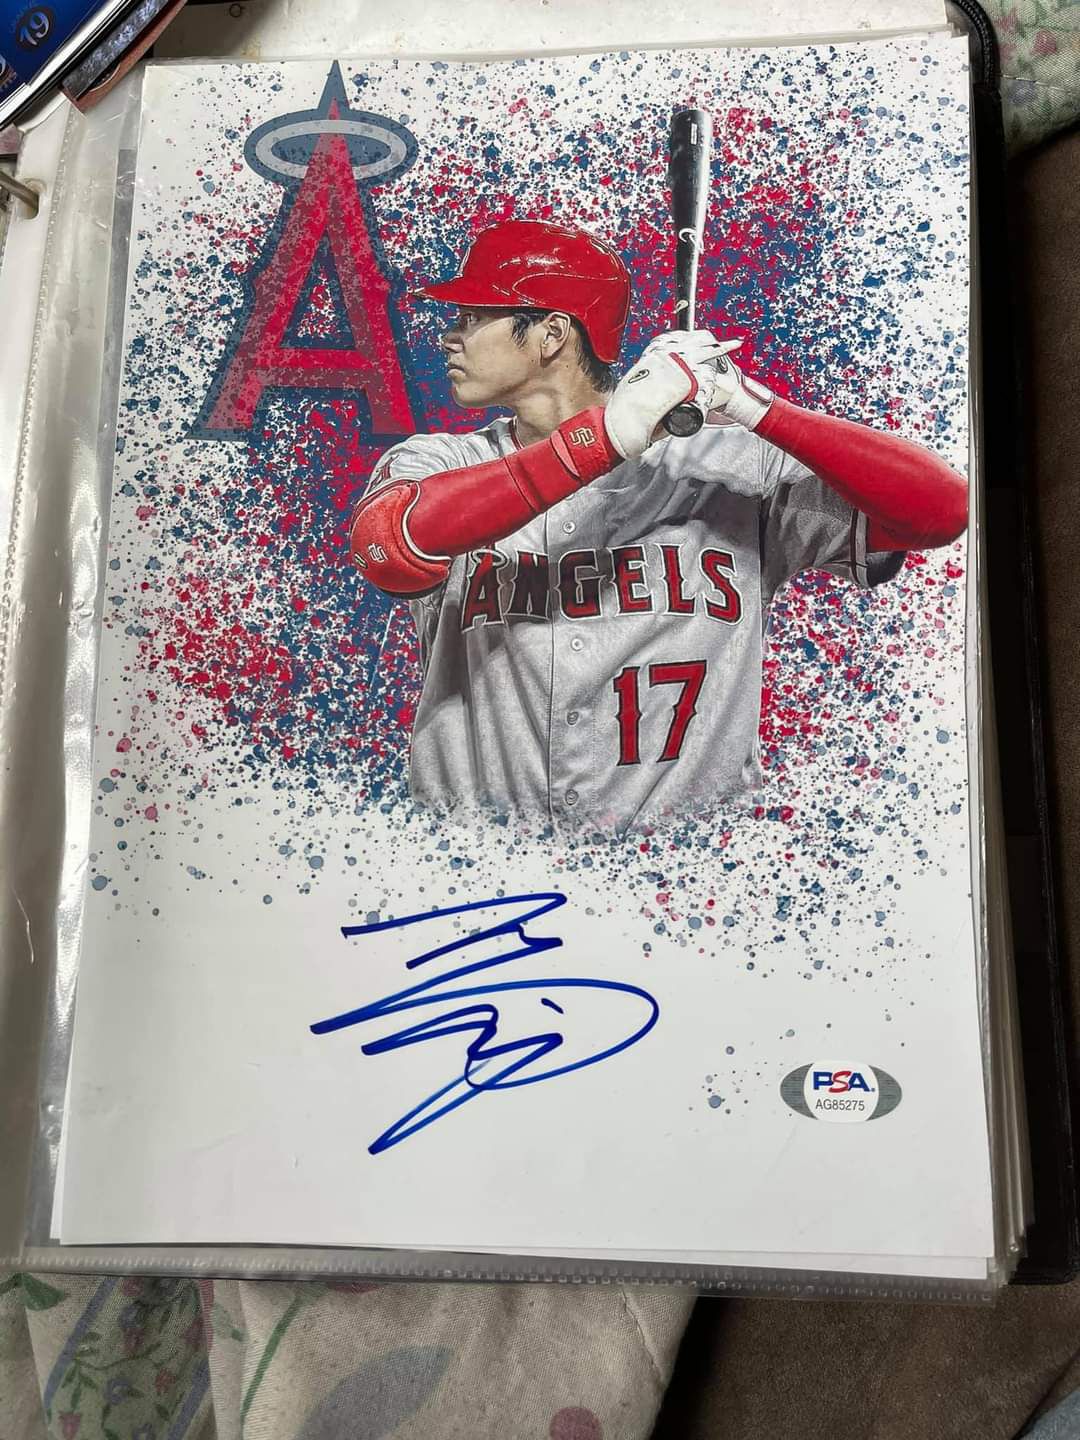 Shohei Ohtani Signed Photo for Sale in San Francisco, CA - OfferUp